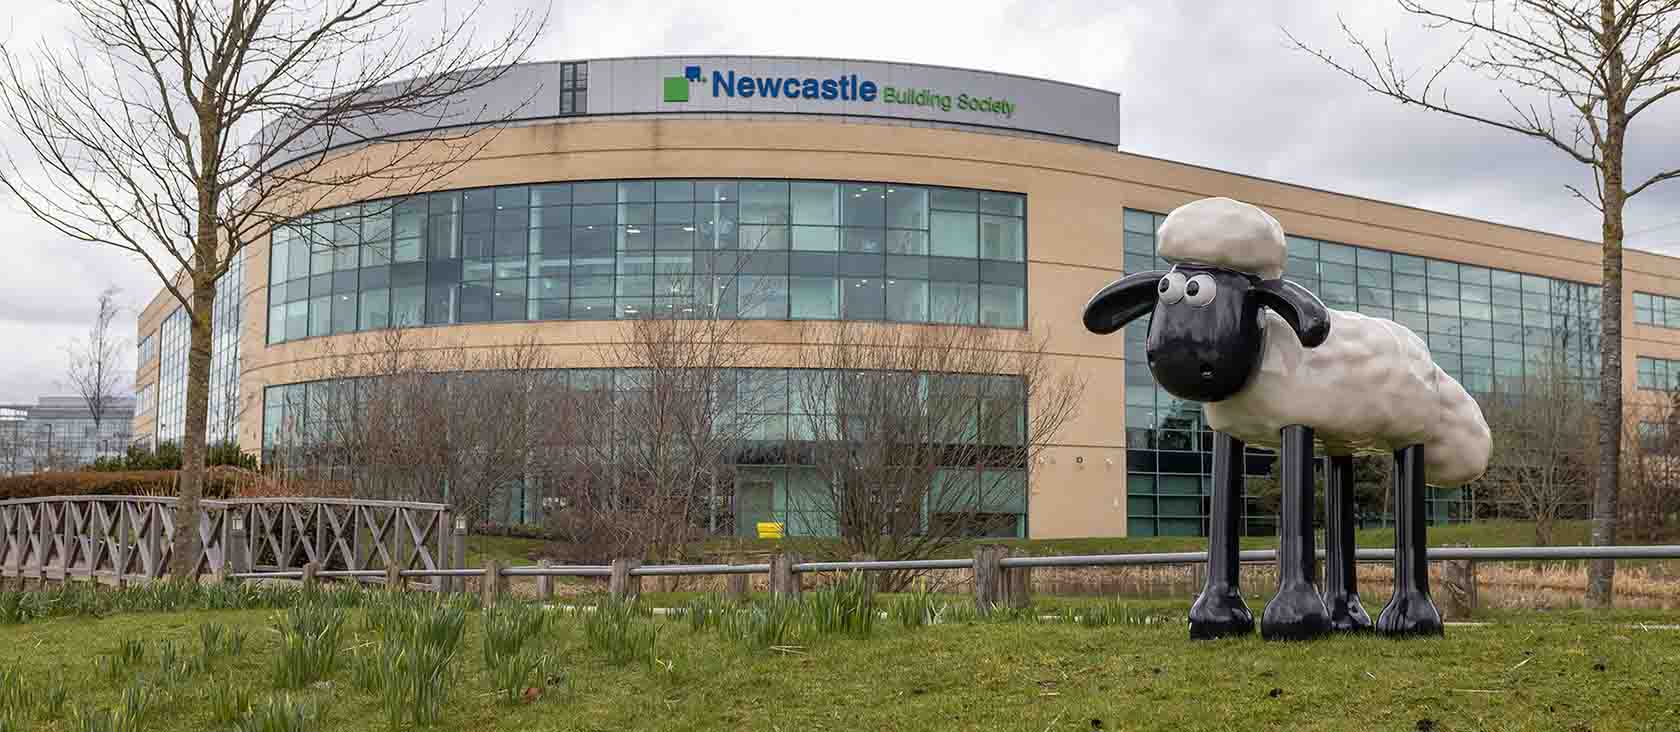 Sculpture of Shaun the Sheep stood in front of the Newcastle Building Society head office, Cobalt office.